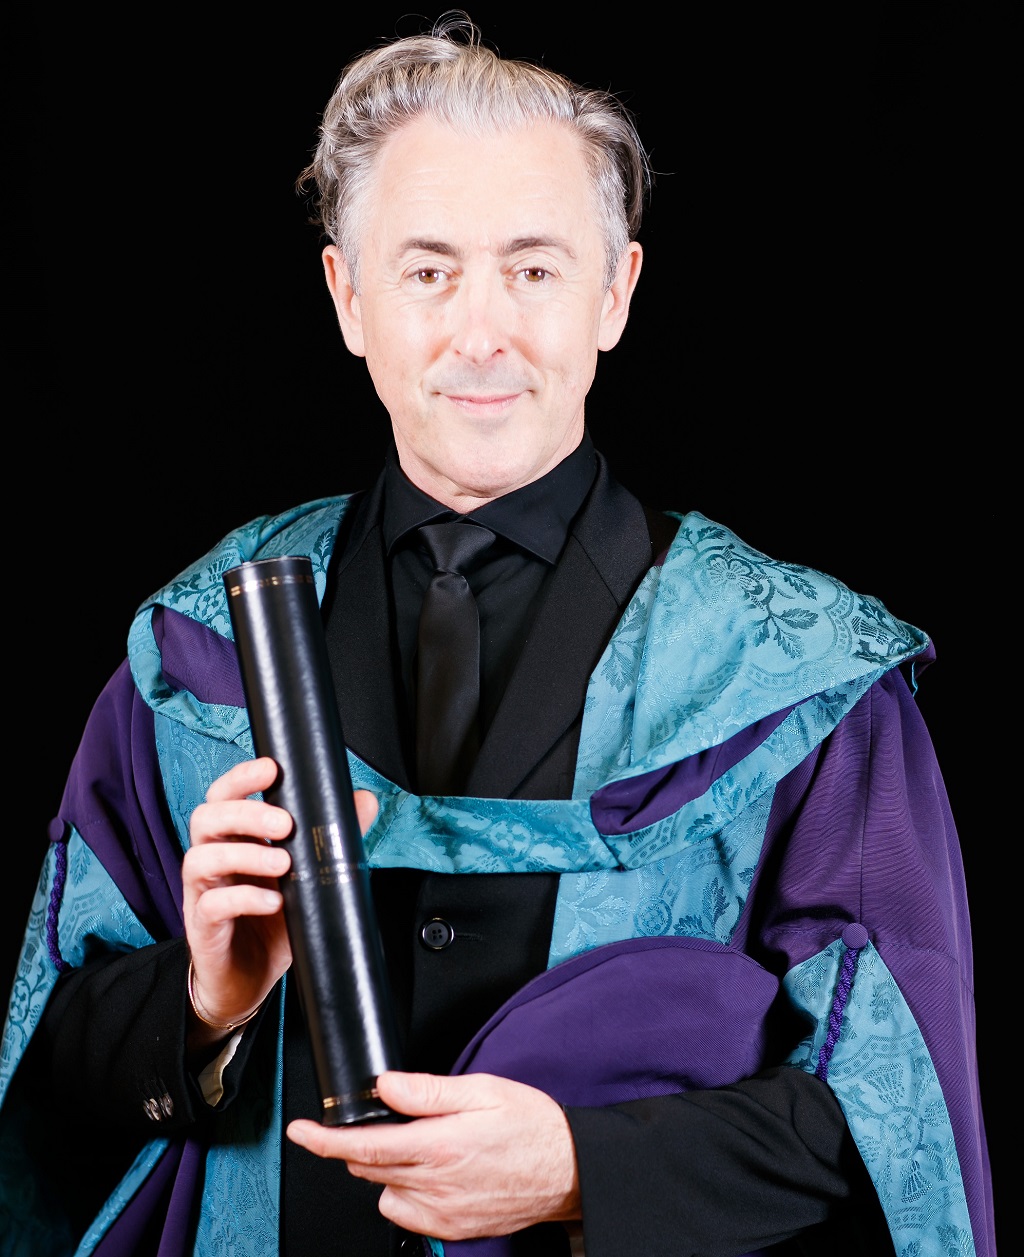 Alan Cumming with his honorary doctorate from the Royal Conservatoire of Scotland (Photo: Robert McFadzean)